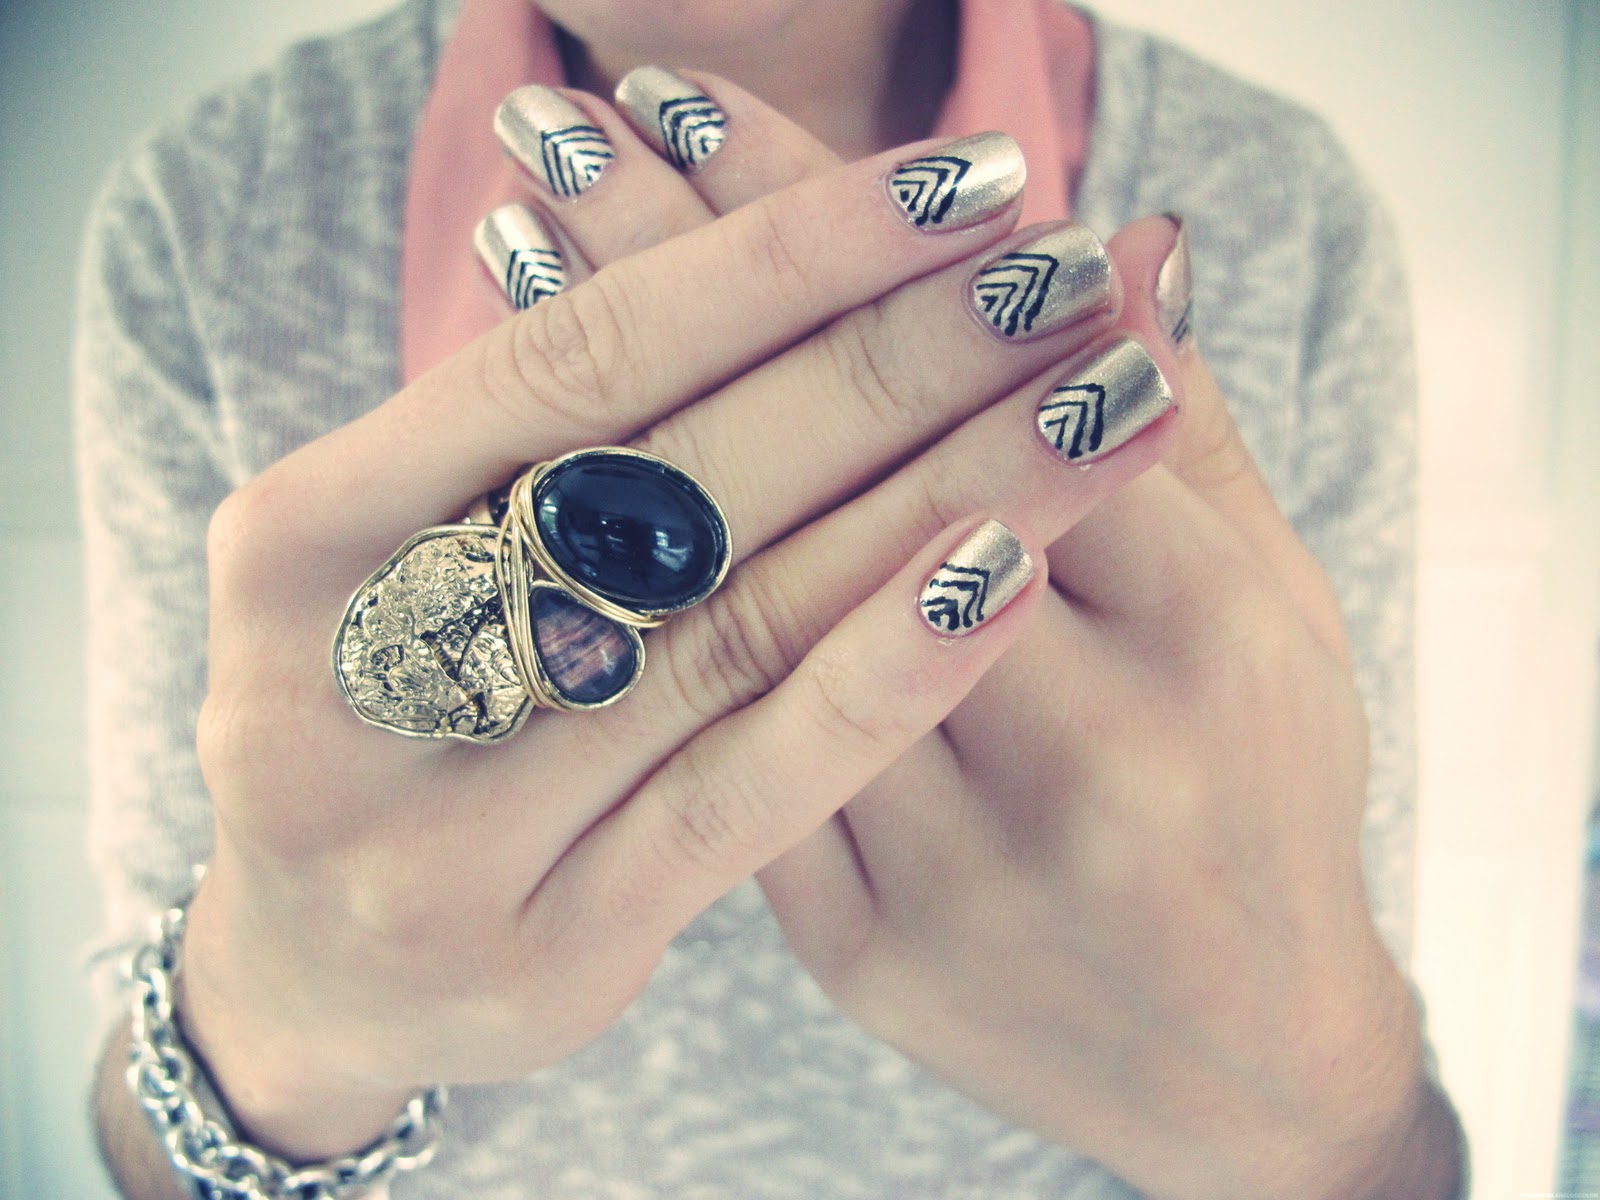 Ring: Forever 21. Very messy nails, but you get the idea!